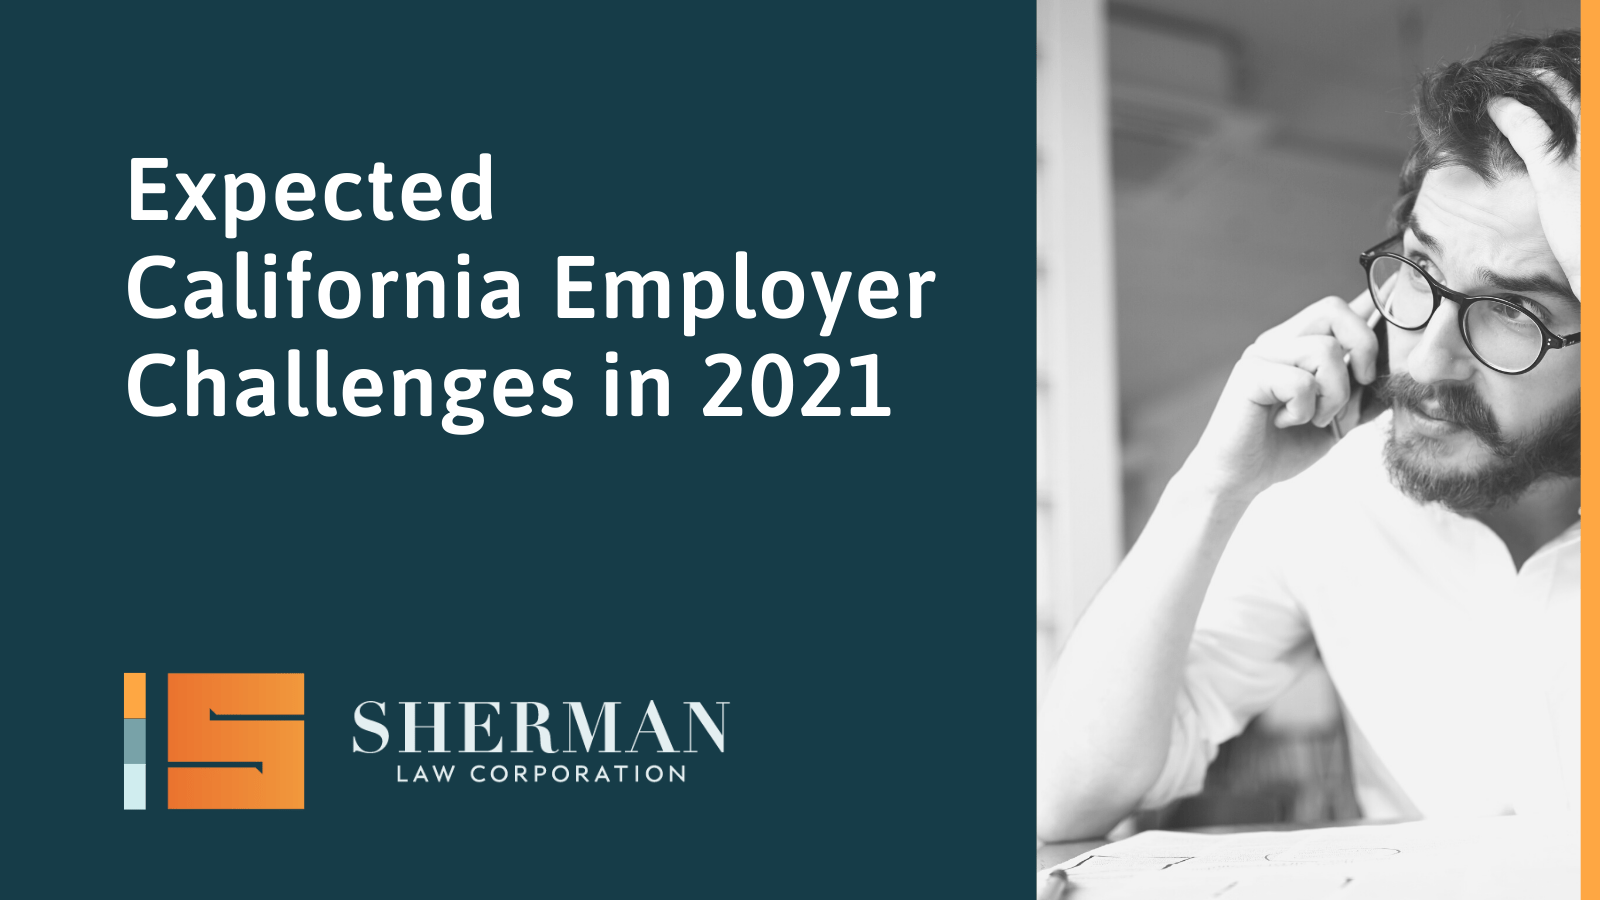 Expected California Employer Challenges - sherman law corporation